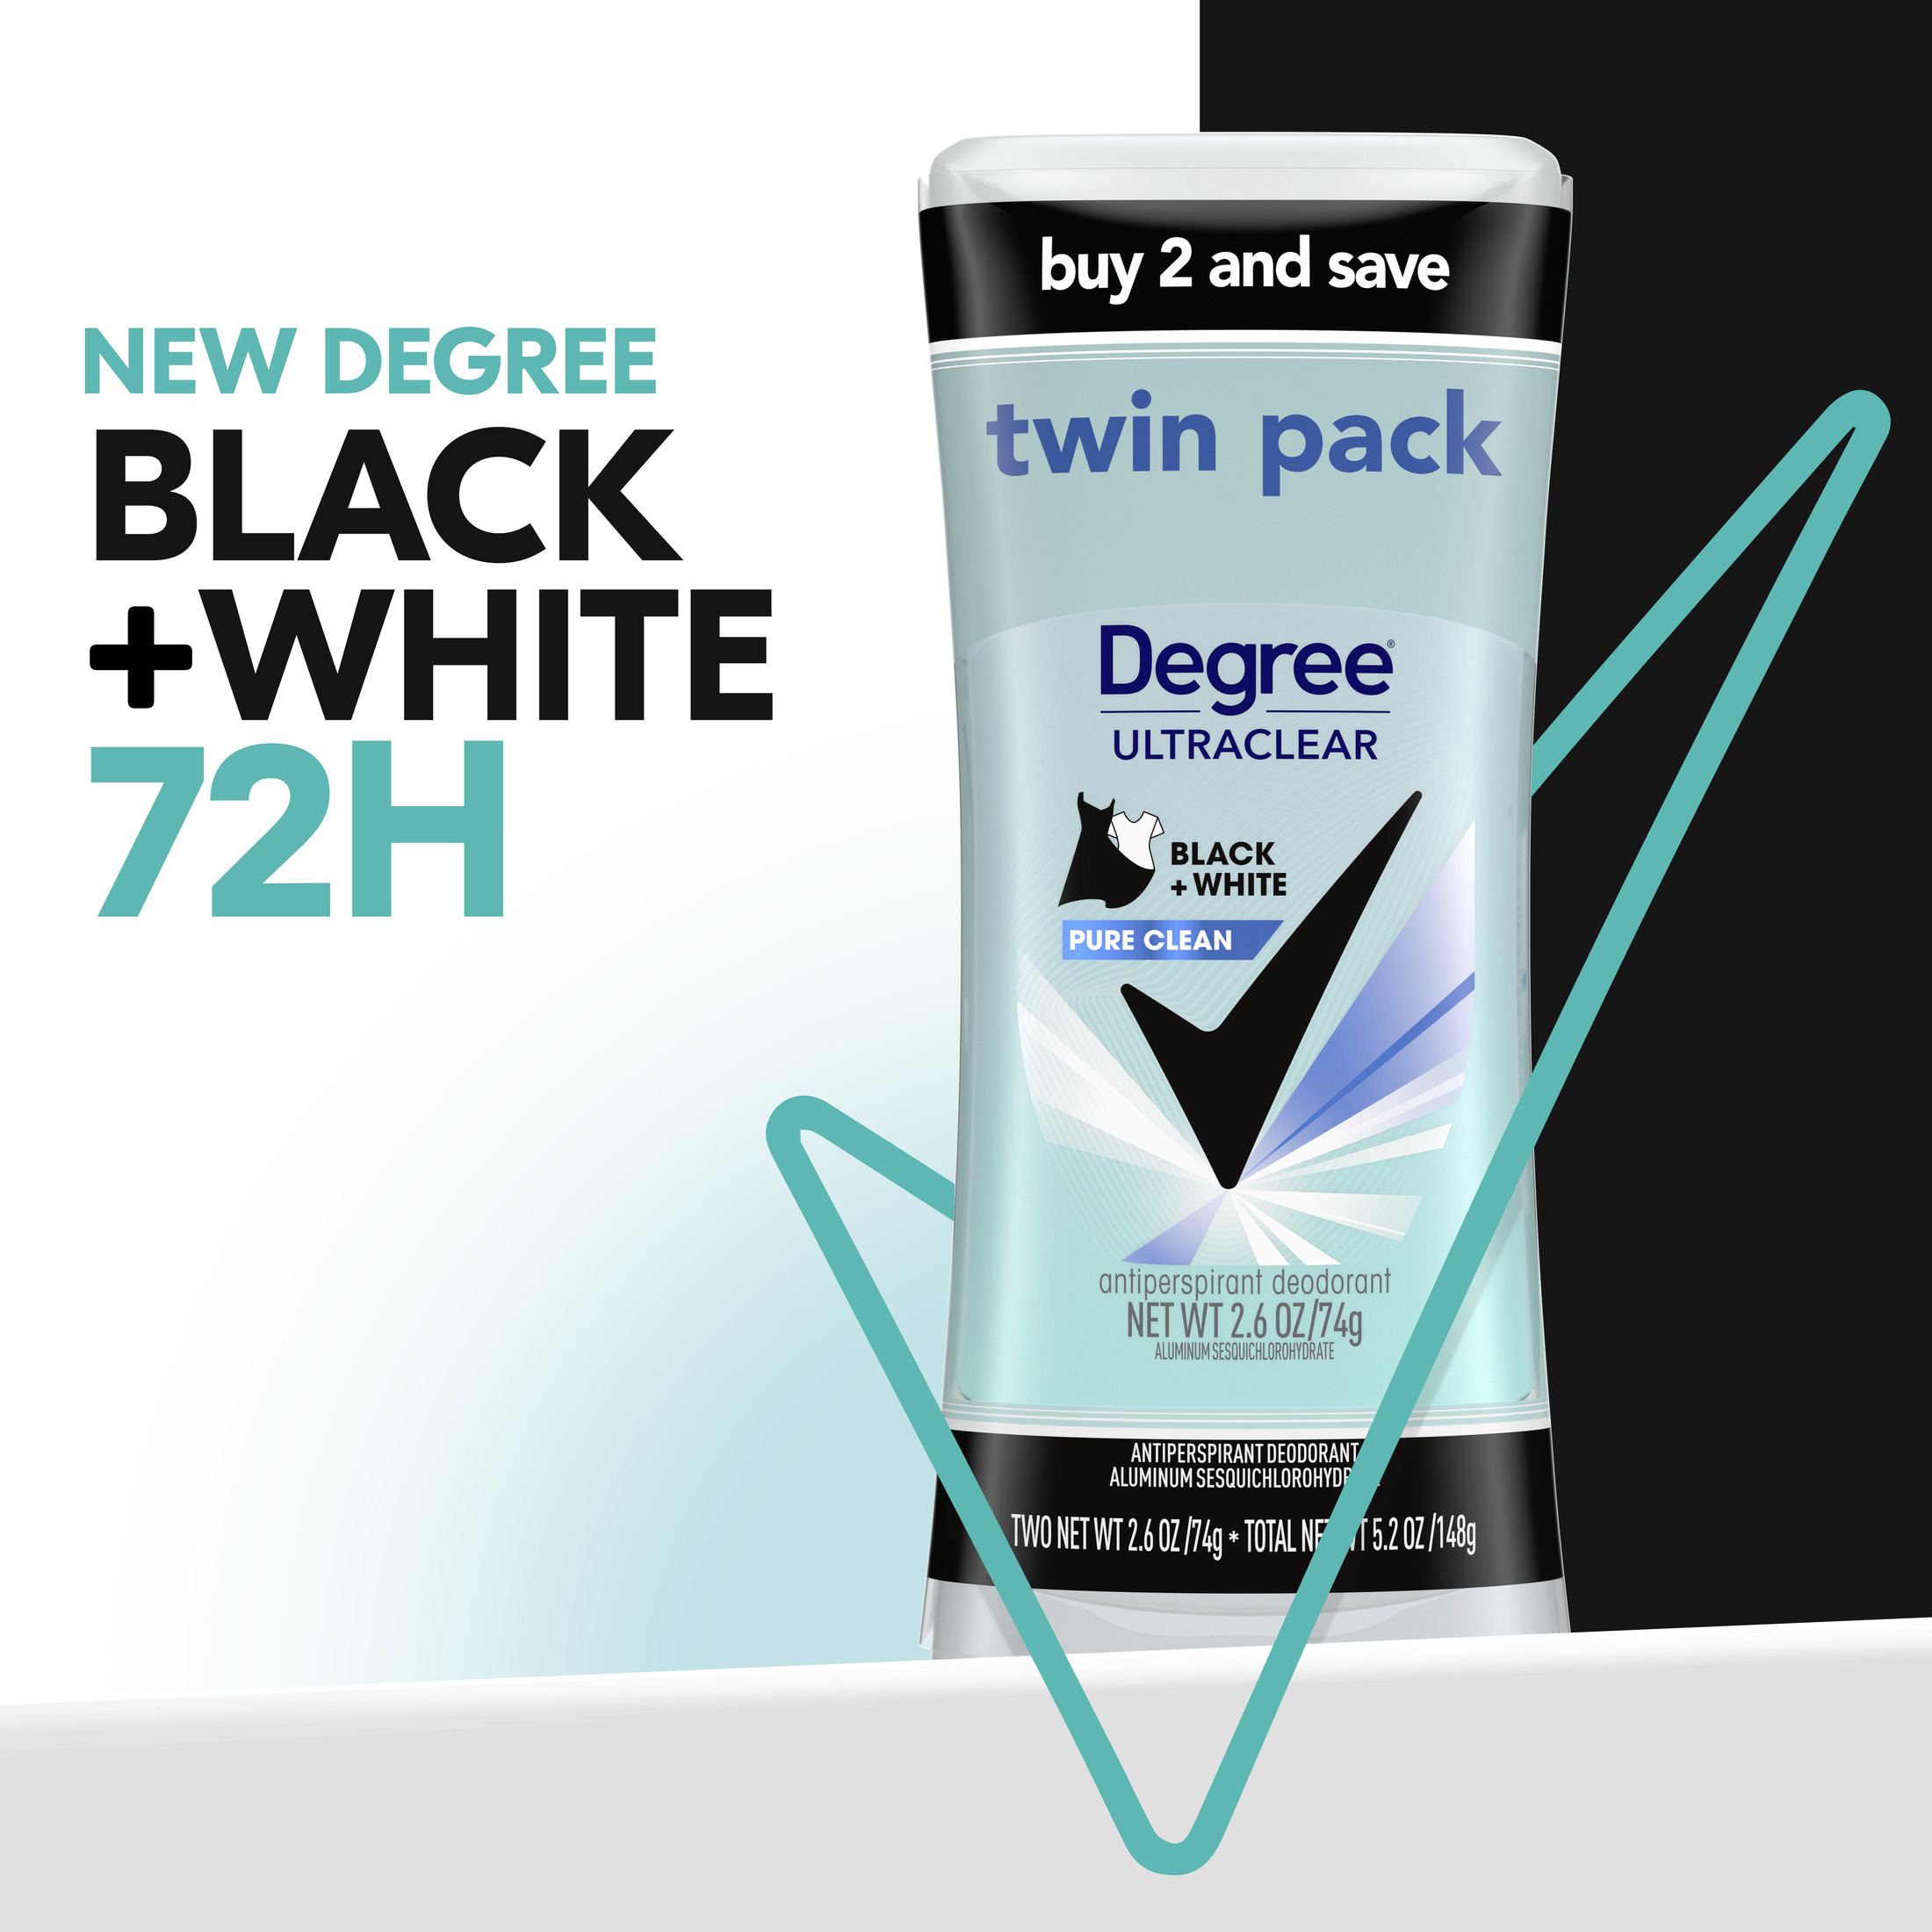 Degree Ultra Clear Long Lasting Women's Antiperspirant Deodorant Stick Twin Pack, Pure Clean, 2.6 oz - image 5 of 11